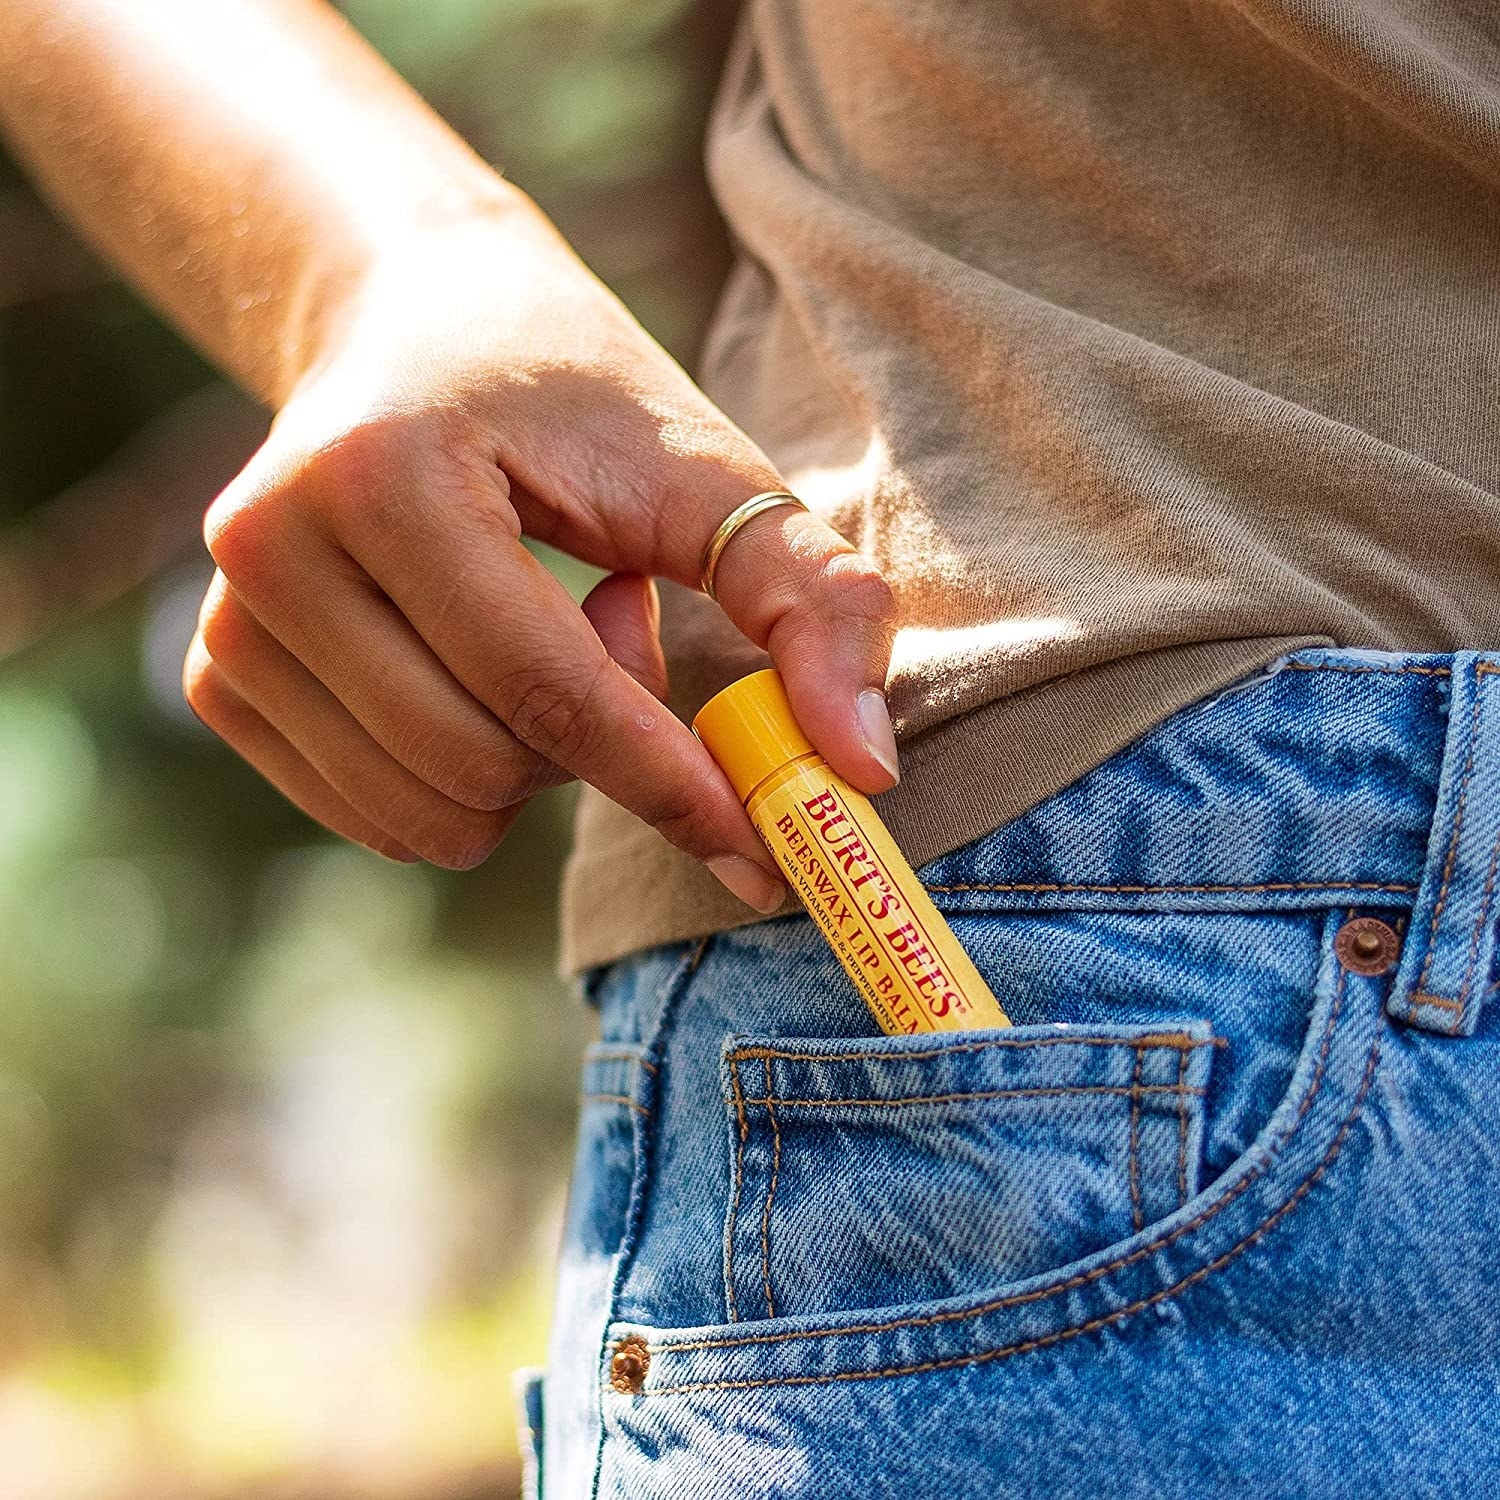 hand pulls Burt's Bees lip balm tube out of jean pocket